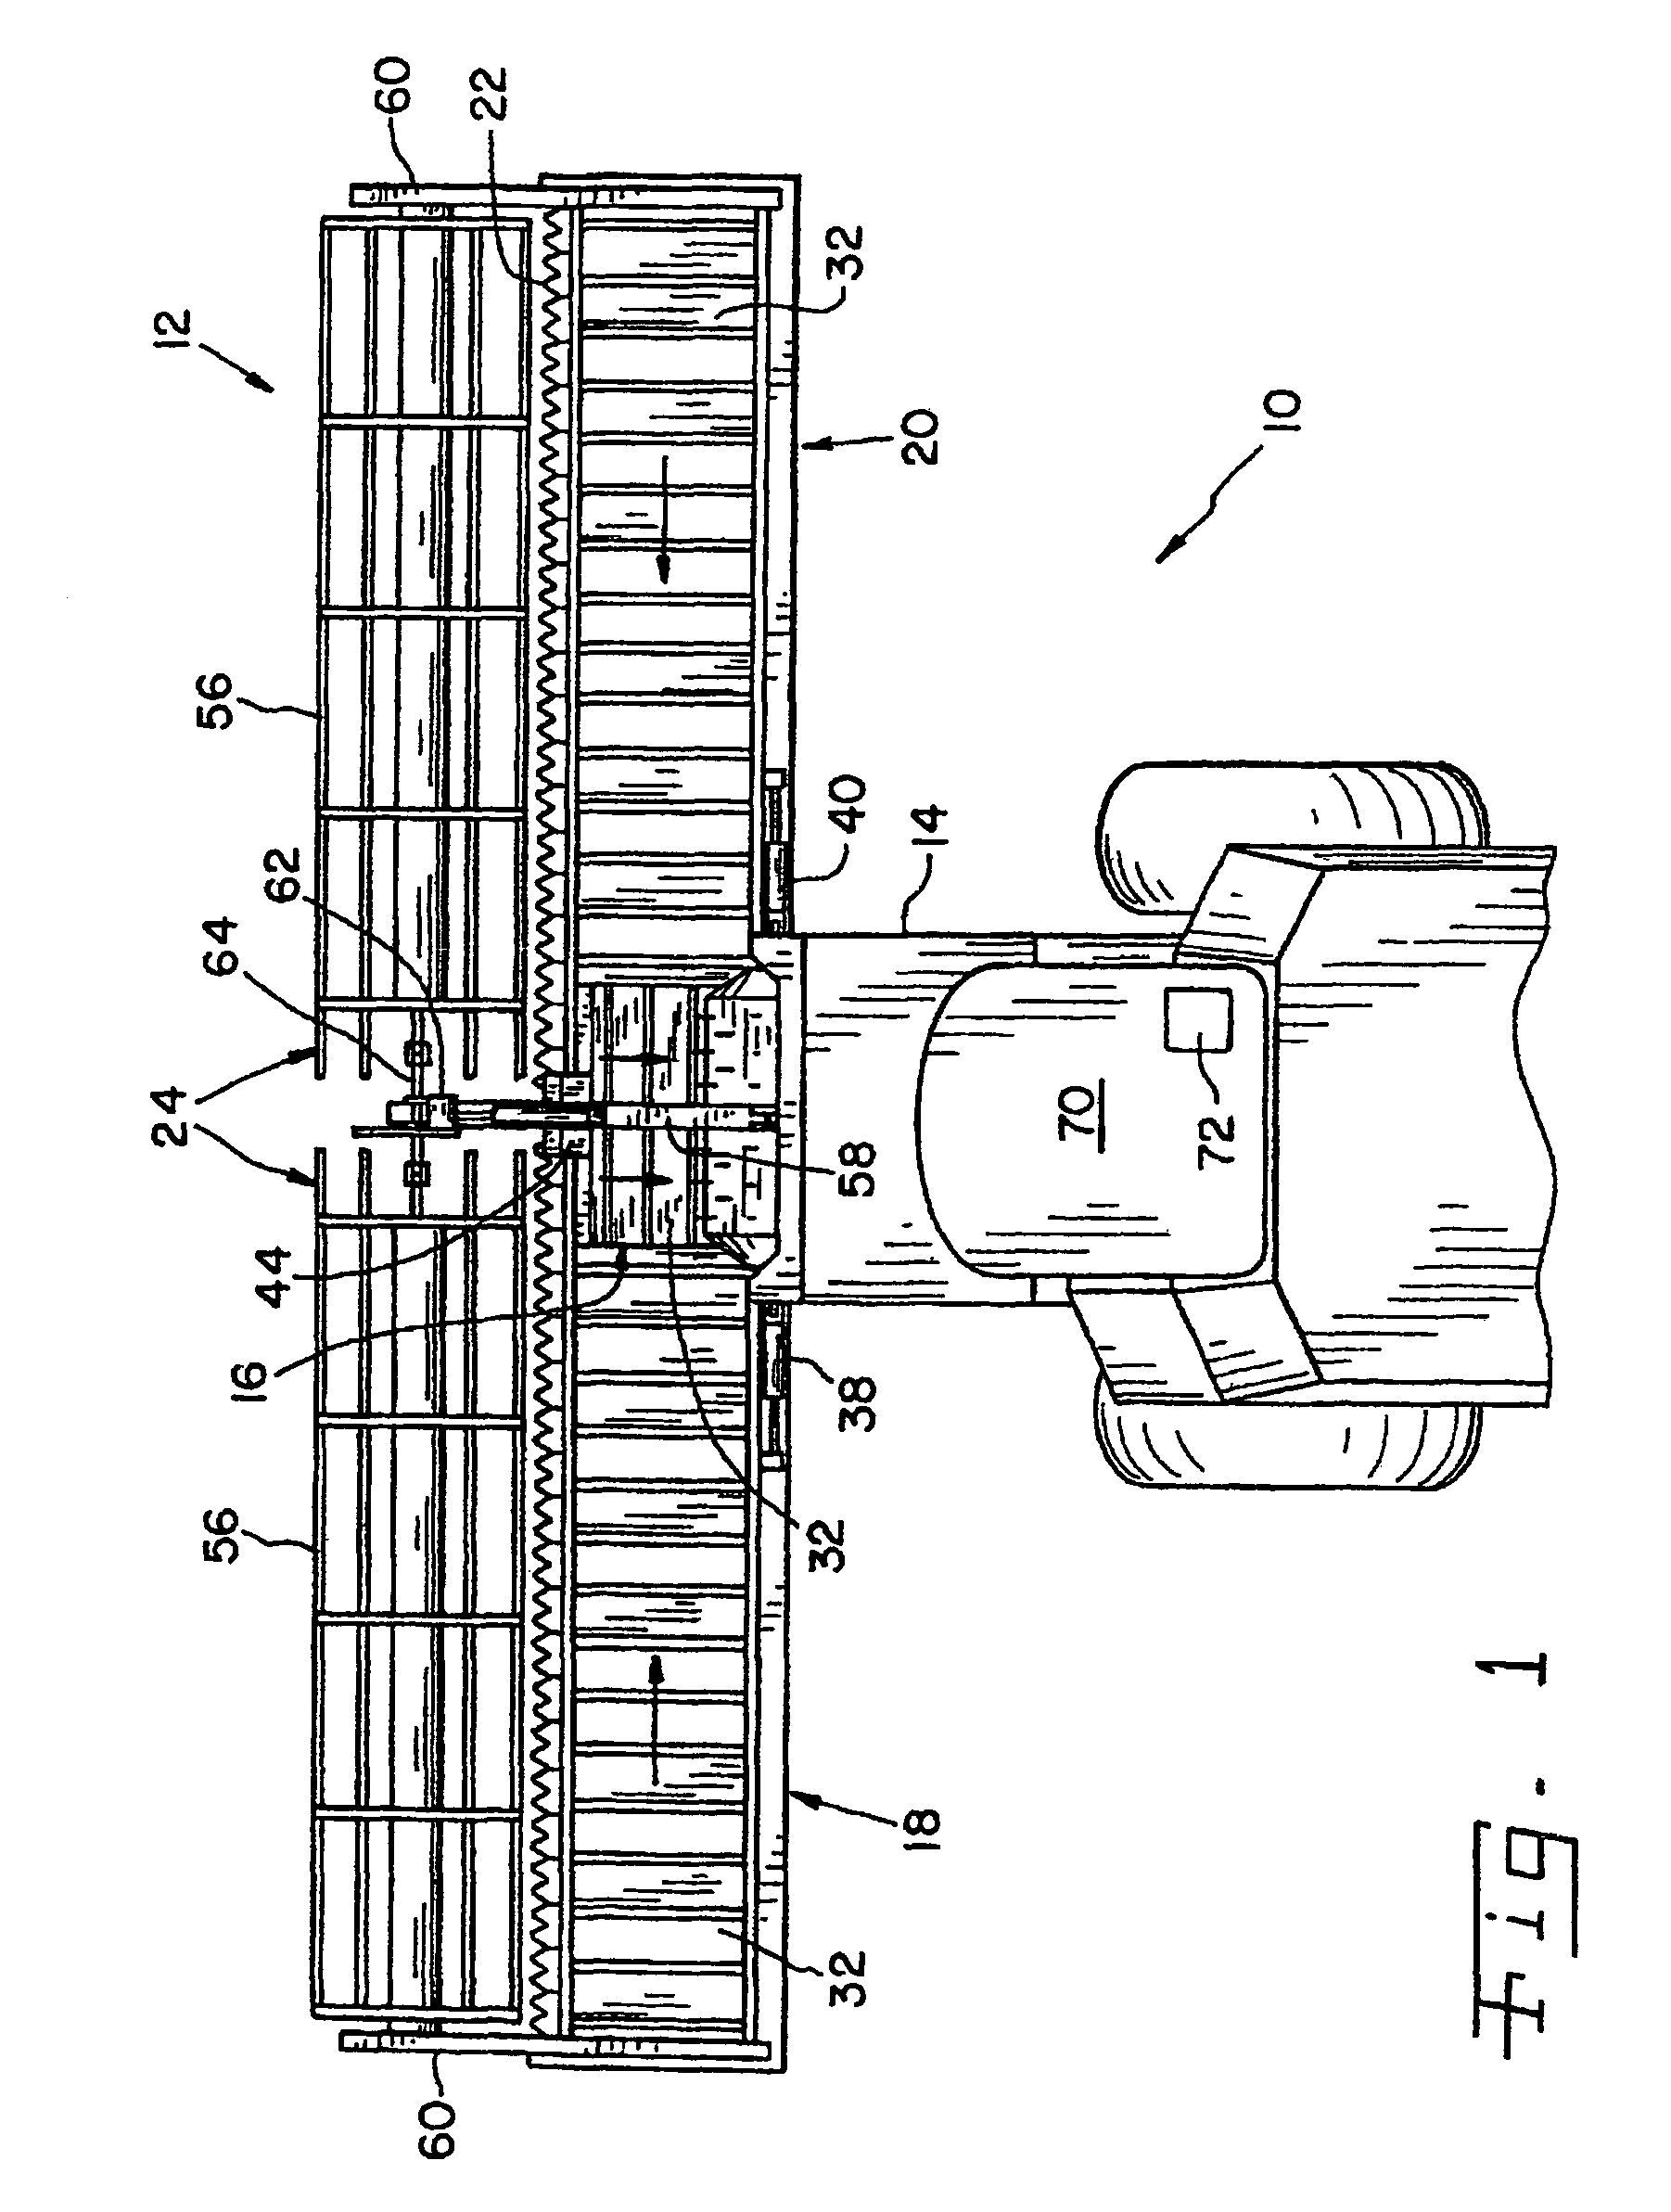 Flexible cutting platform with passive float arm stop in an agricultural harvesting machine